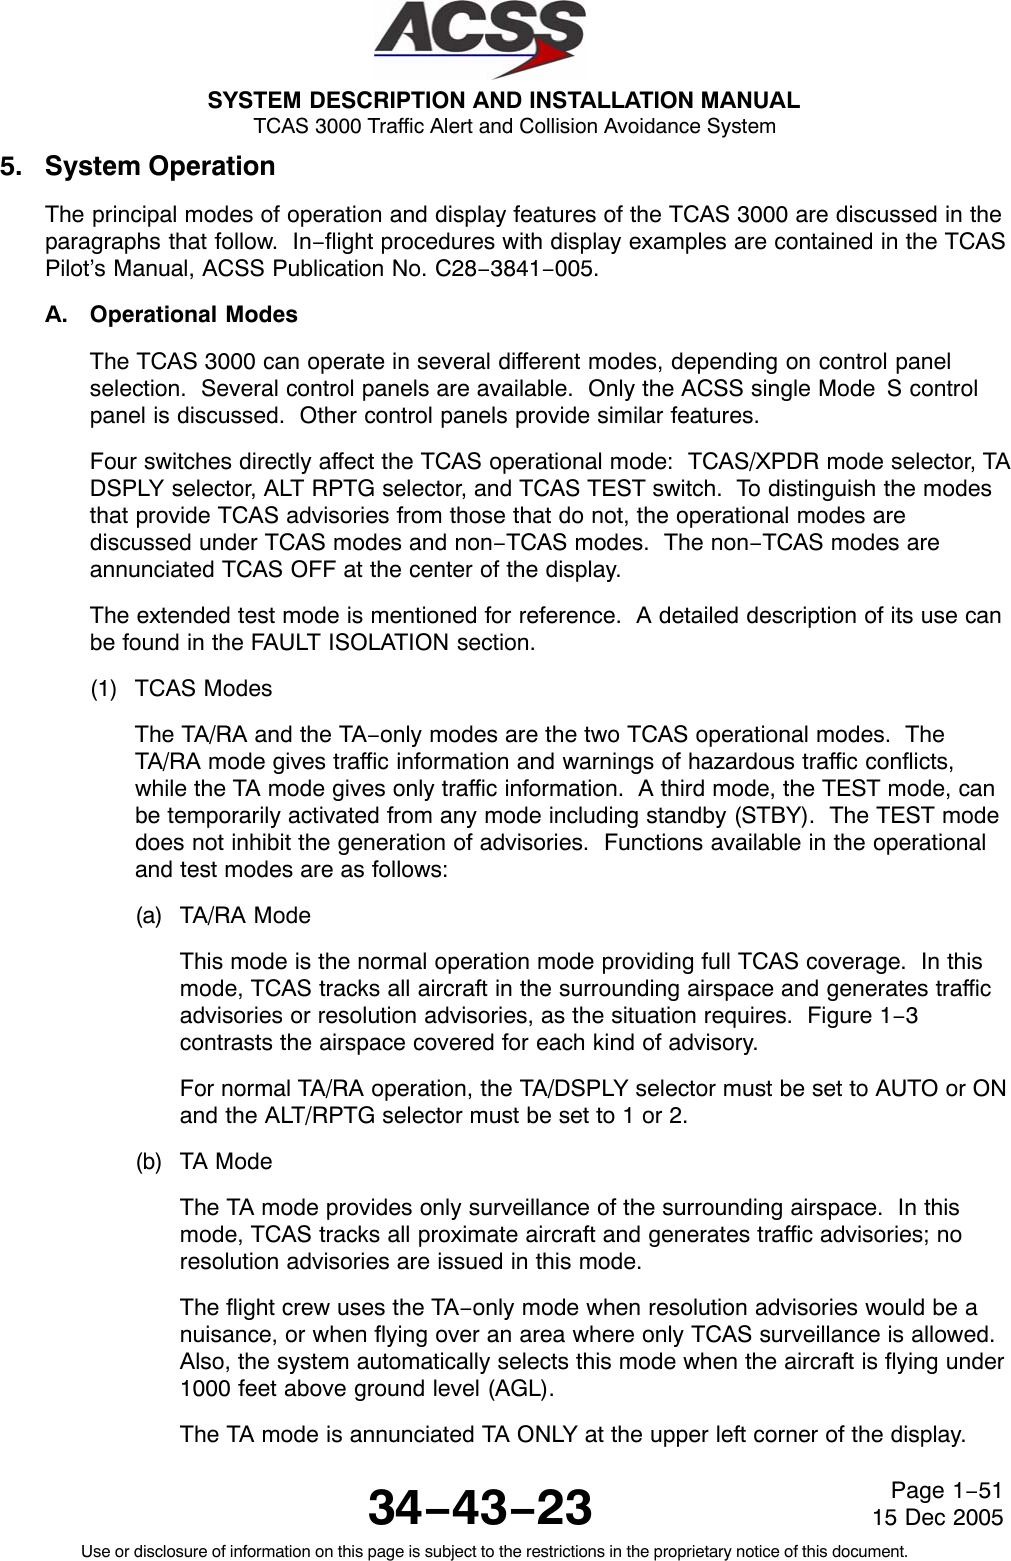 SYSTEM DESCRIPTION AND INSTALLATION MANUAL TCAS 3000 Traffic Alert and Collision Avoidance System34−43−23Use or disclosure of information on this page is subject to the restrictions in the proprietary notice of this document.Page 1−5115 Dec 20055. System OperationThe principal modes of operation and display features of the TCAS 3000 are discussed in theparagraphs that follow.  In−flight procedures with display examples are contained in the TCASPilot’s Manual, ACSS Publication No. C28−3841−005.A. Operational ModesThe TCAS 3000 can operate in several different modes, depending on control panelselection.  Several control panels are available.  Only the ACSS single Mode S controlpanel is discussed.  Other control panels provide similar features.Four switches directly affect the TCAS operational mode:  TCAS/XPDR mode selector, TADSPLY selector, ALT RPTG selector, and TCAS TEST switch.  To distinguish the modesthat provide TCAS advisories from those that do not, the operational modes arediscussed under TCAS modes and non−TCAS modes.  The non−TCAS modes areannunciated TCAS OFF at the center of the display.The extended test mode is mentioned for reference.  A detailed description of its use canbe found in the FAULT ISOLATION section.(1) TCAS ModesThe TA/RA and the TA−only modes are the two TCAS operational modes.  TheTA/RA mode gives traffic information and warnings of hazardous traffic conflicts,while the TA mode gives only traffic information.  A third mode, the TEST mode, canbe temporarily activated from any mode including standby (STBY).  The TEST modedoes not inhibit the generation of advisories.  Functions available in the operationaland test modes are as follows:(a) TA/RA ModeThis mode is the normal operation mode providing full TCAS coverage.  In thismode, TCAS tracks all aircraft in the surrounding airspace and generates trafficadvisories or resolution advisories, as the situation requires.  Figure 1−3contrasts the airspace covered for each kind of advisory.For normal TA/RA operation, the TA/DSPLY selector must be set to AUTO or ONand the ALT/RPTG selector must be set to 1 or 2.(b) TA ModeThe TA mode provides only surveillance of the surrounding airspace.  In thismode, TCAS tracks all proximate aircraft and generates traffic advisories; noresolution advisories are issued in this mode.The flight crew uses the TA−only mode when resolution advisories would be anuisance, or when flying over an area where only TCAS surveillance is allowed.Also, the system automatically selects this mode when the aircraft is flying under1000 feet above ground level (AGL).The TA mode is annunciated TA ONLY at the upper left corner of the display.